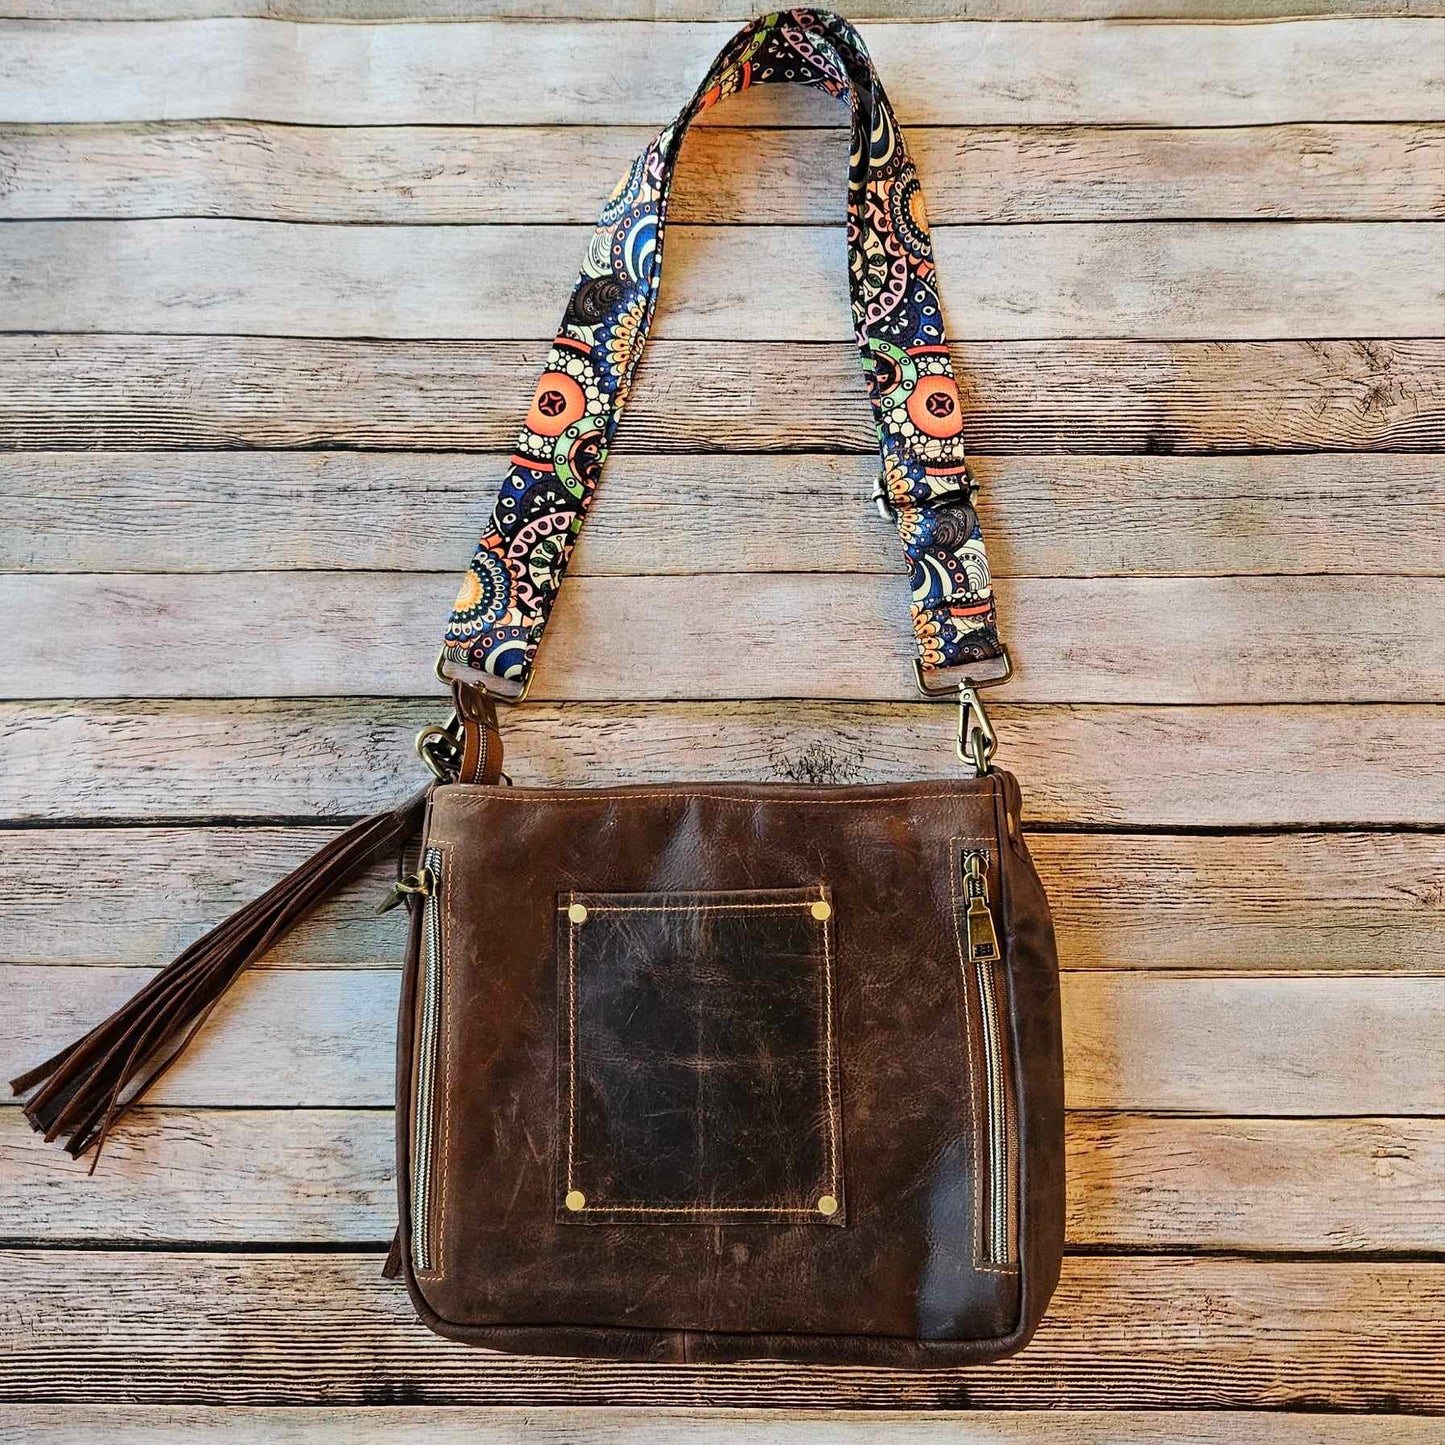 Lyndel Grace Turquoise Brown Leather Conceal Carry Crossbody